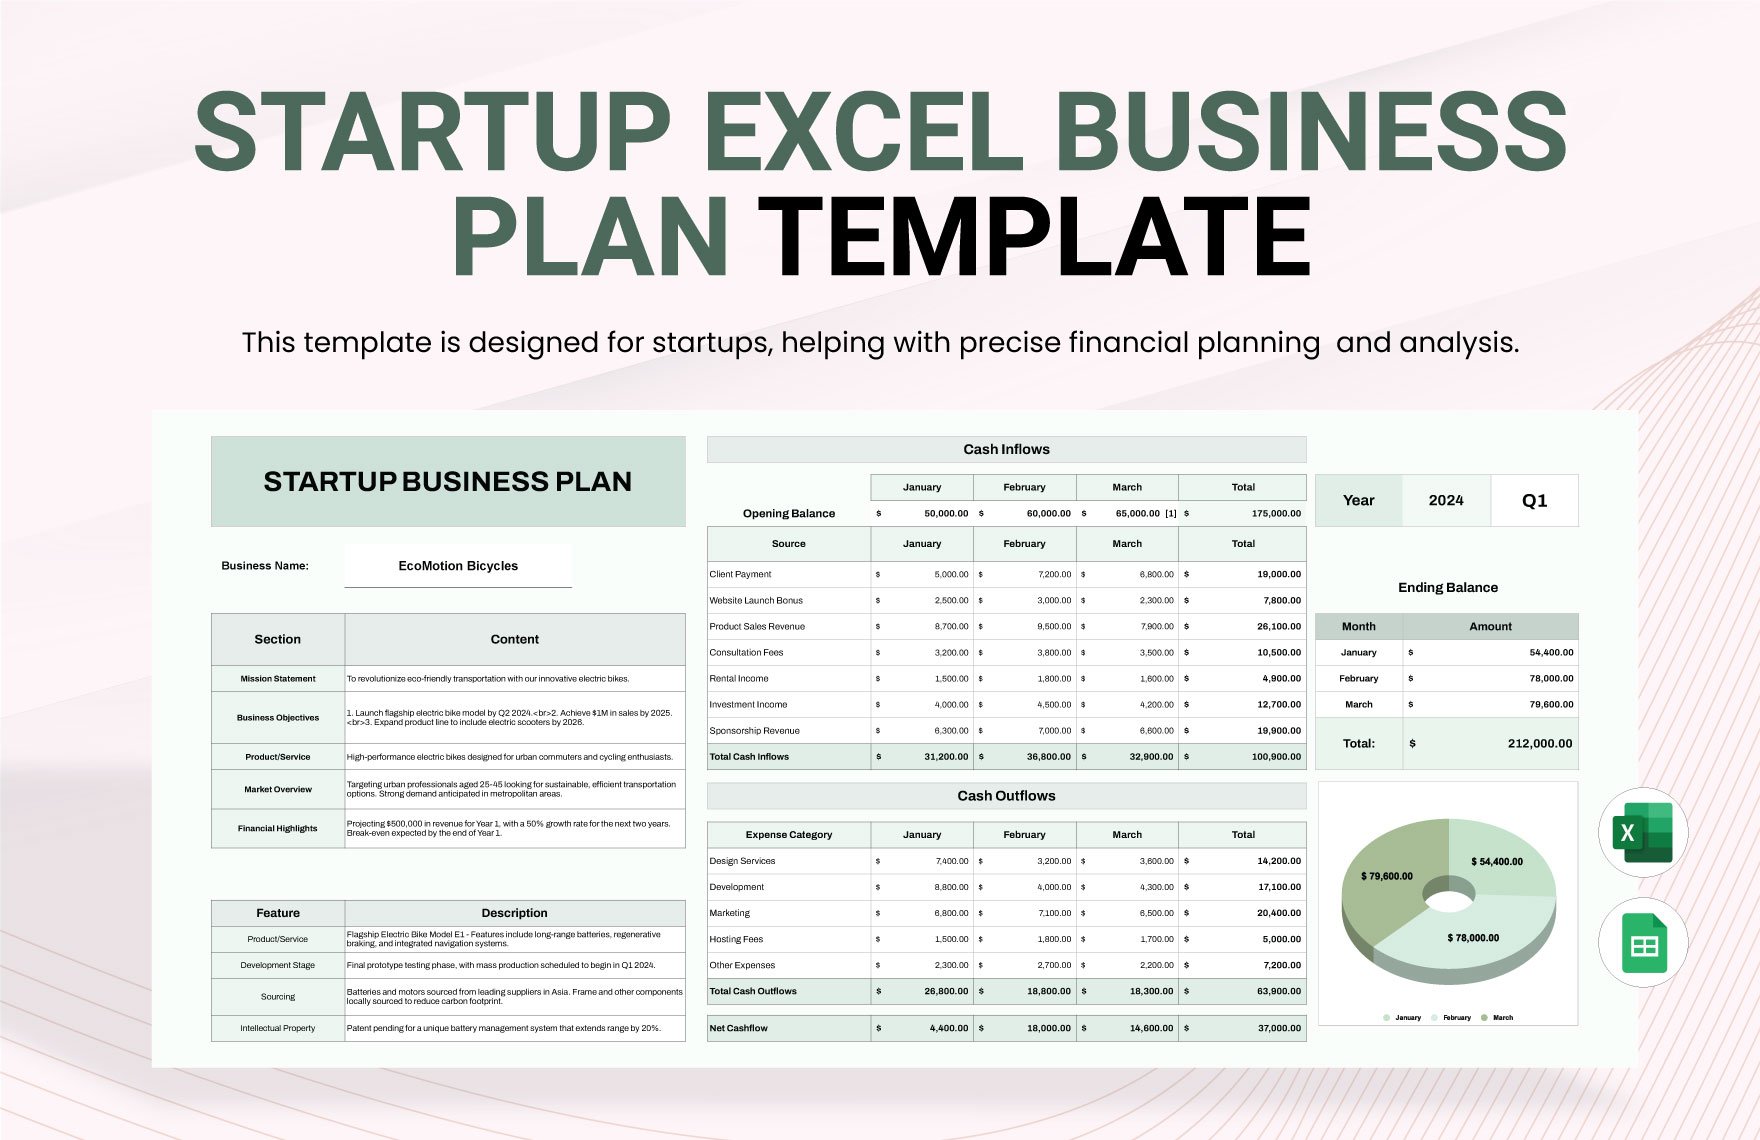 Startup Excel Business Plan Template in Excel, Google Sheets